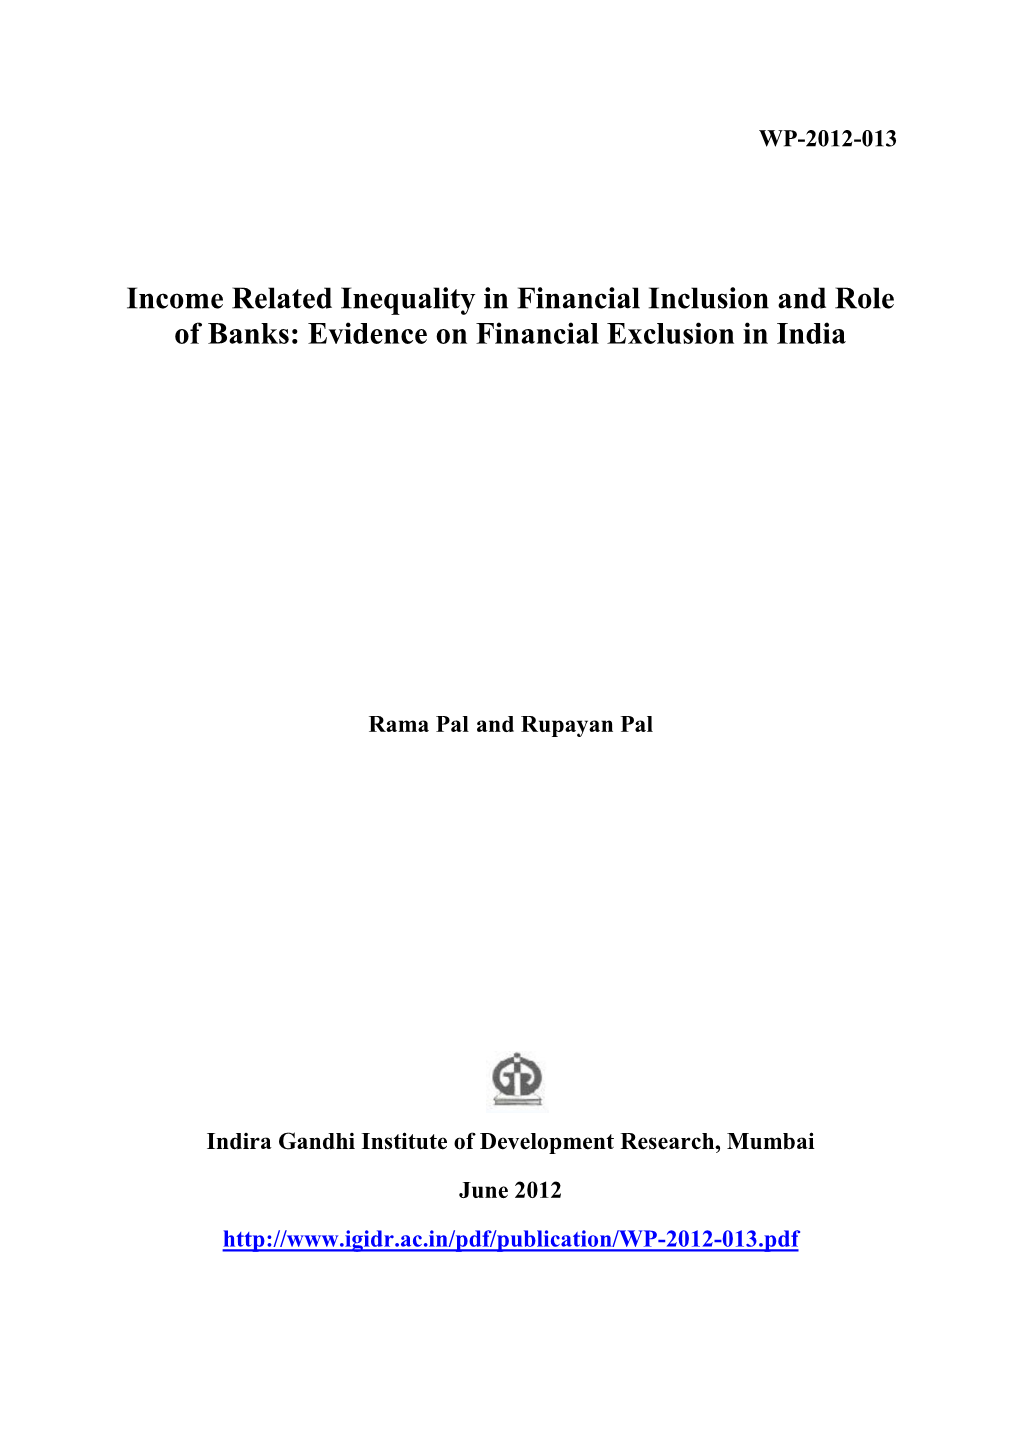 Income Related Inequality in Financial Inclusion and Role of Banks: Evidence on Financial Exclusion in India